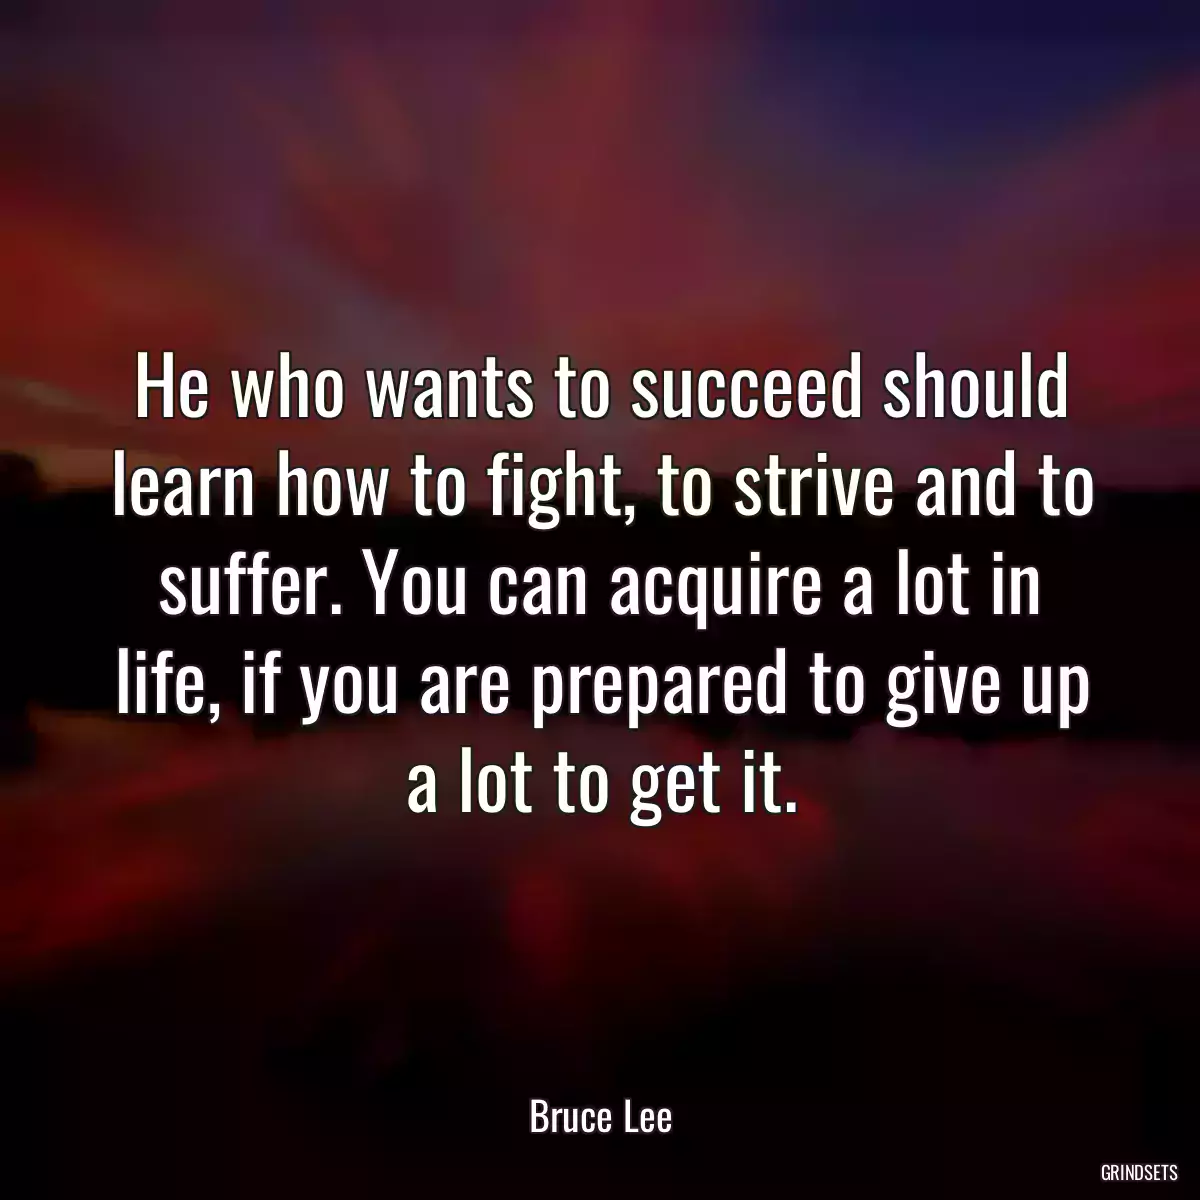 He who wants to succeed should learn how to fight, to strive and to suffer. You can acquire a lot in life, if you are prepared to give up a lot to get it.